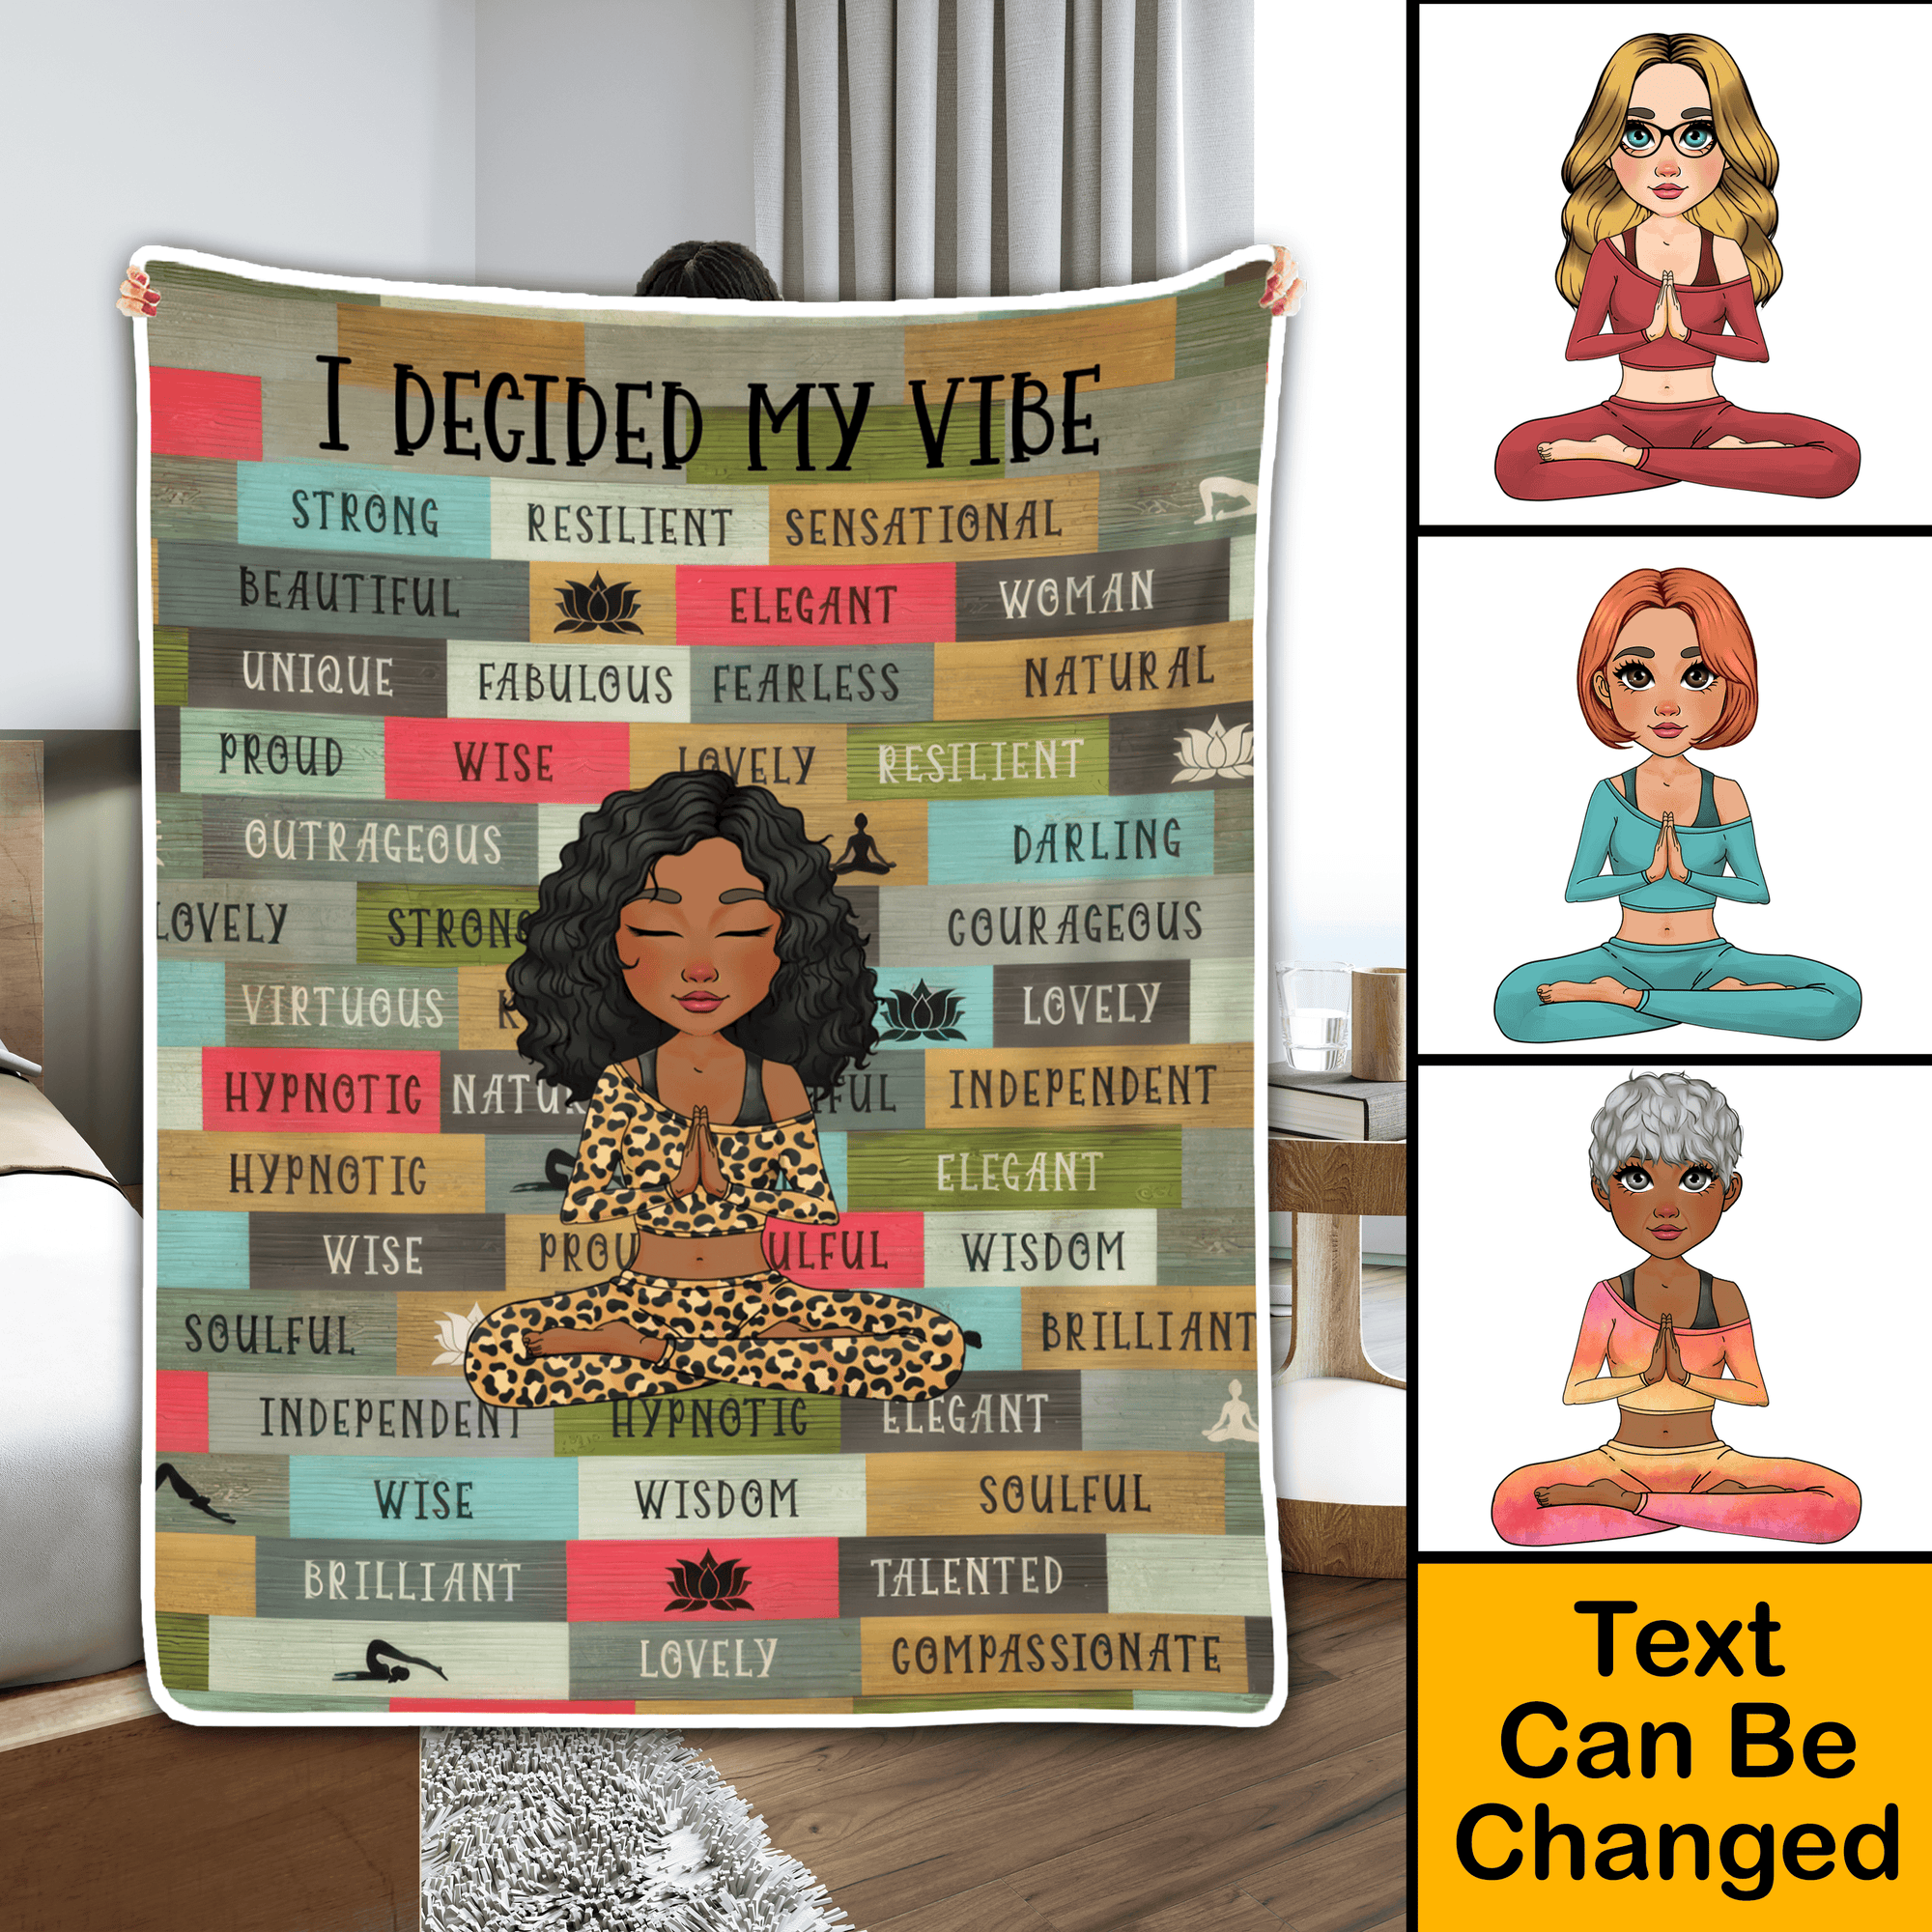 I Decided My Vibe - Personalized Custom Blanket - Gifts for Women, Mental Health Gifts, Inspirational Gifts, Positive Thinking Daily Affirmation - Suzitee Store